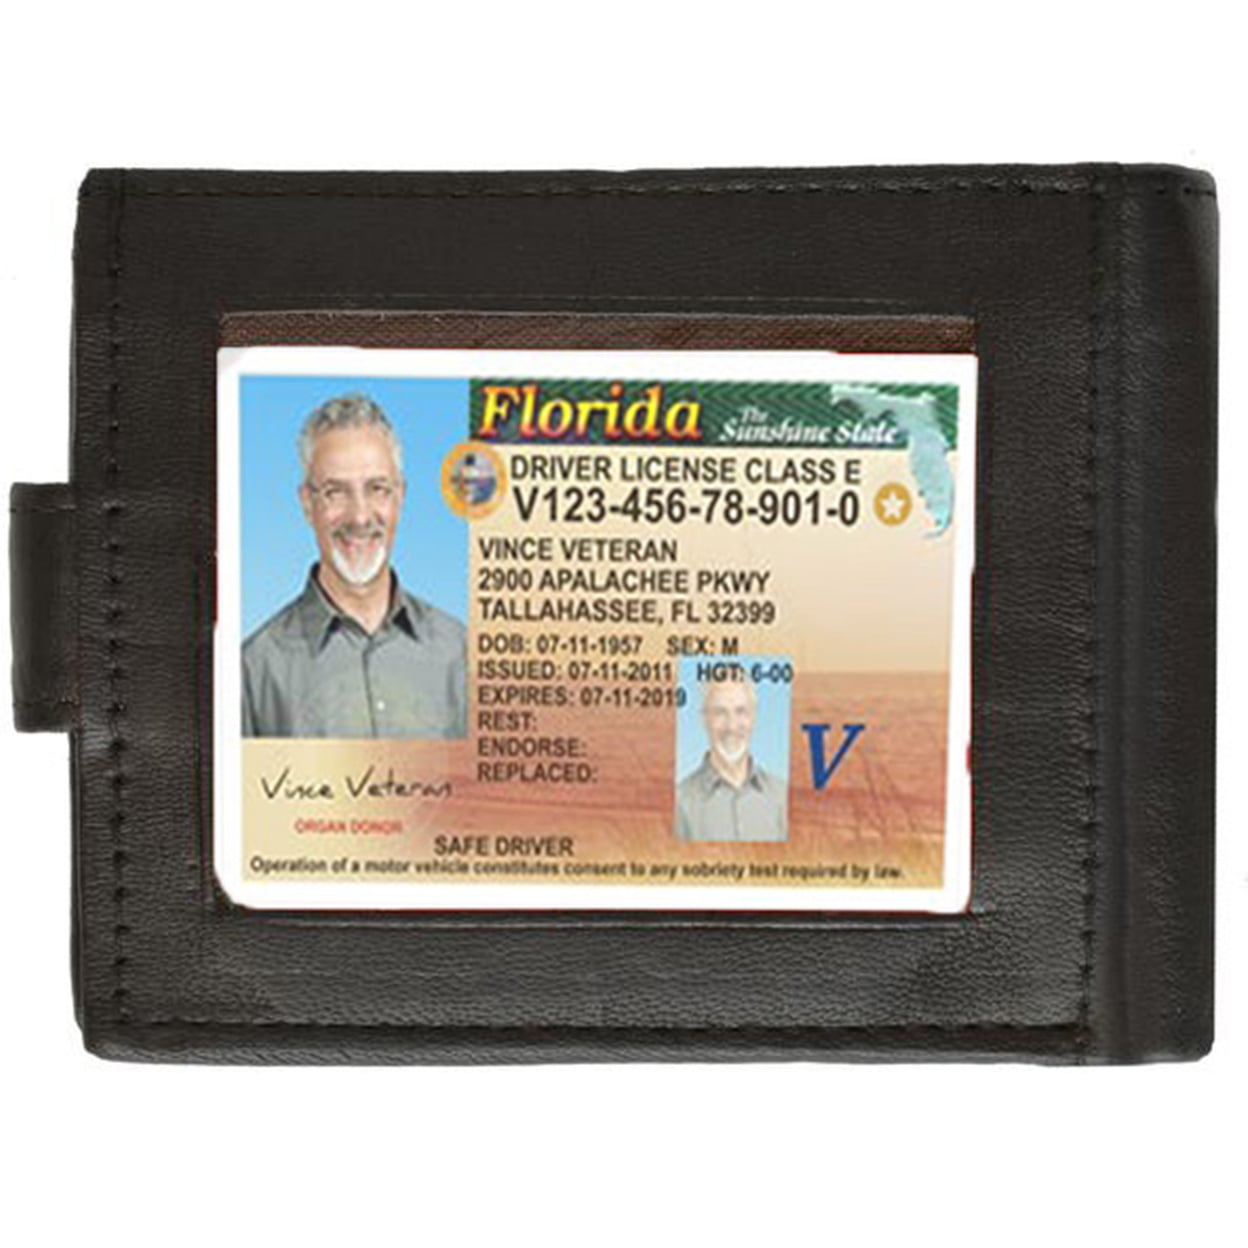 ID card picture Holder Leather Credit Card 24-50 Card Case ID windows BNWT 